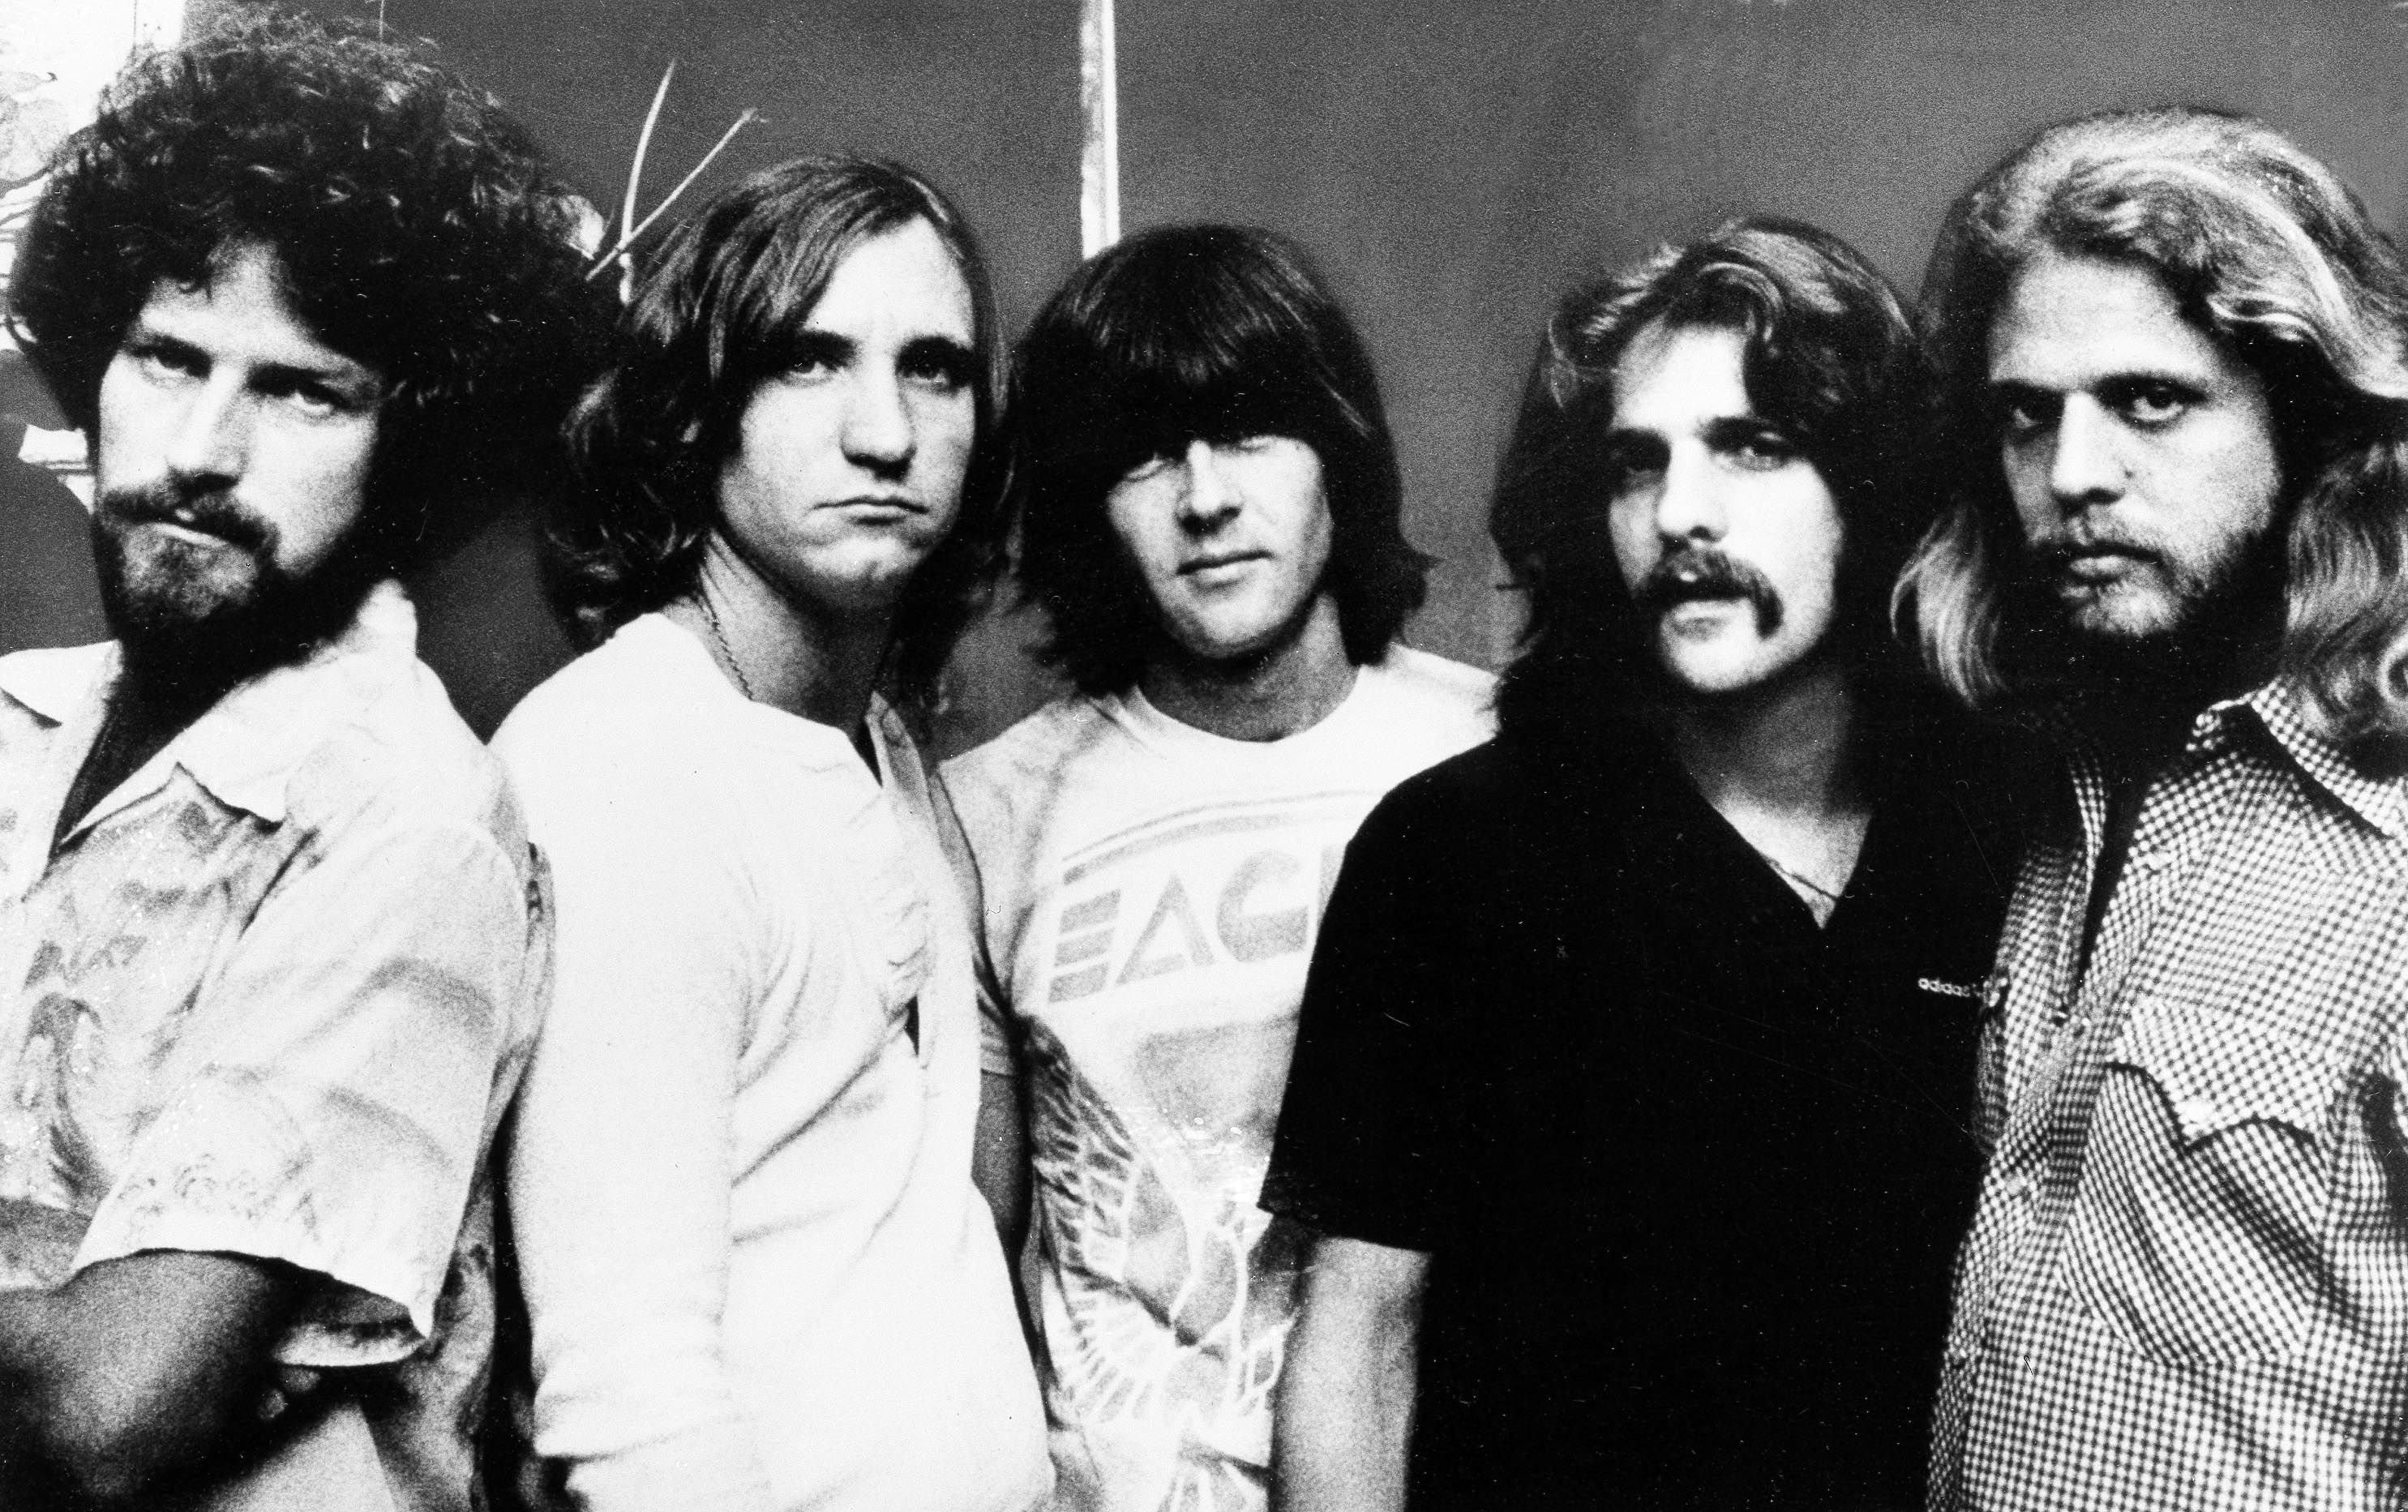 The Eagles Songs, History, and Biography